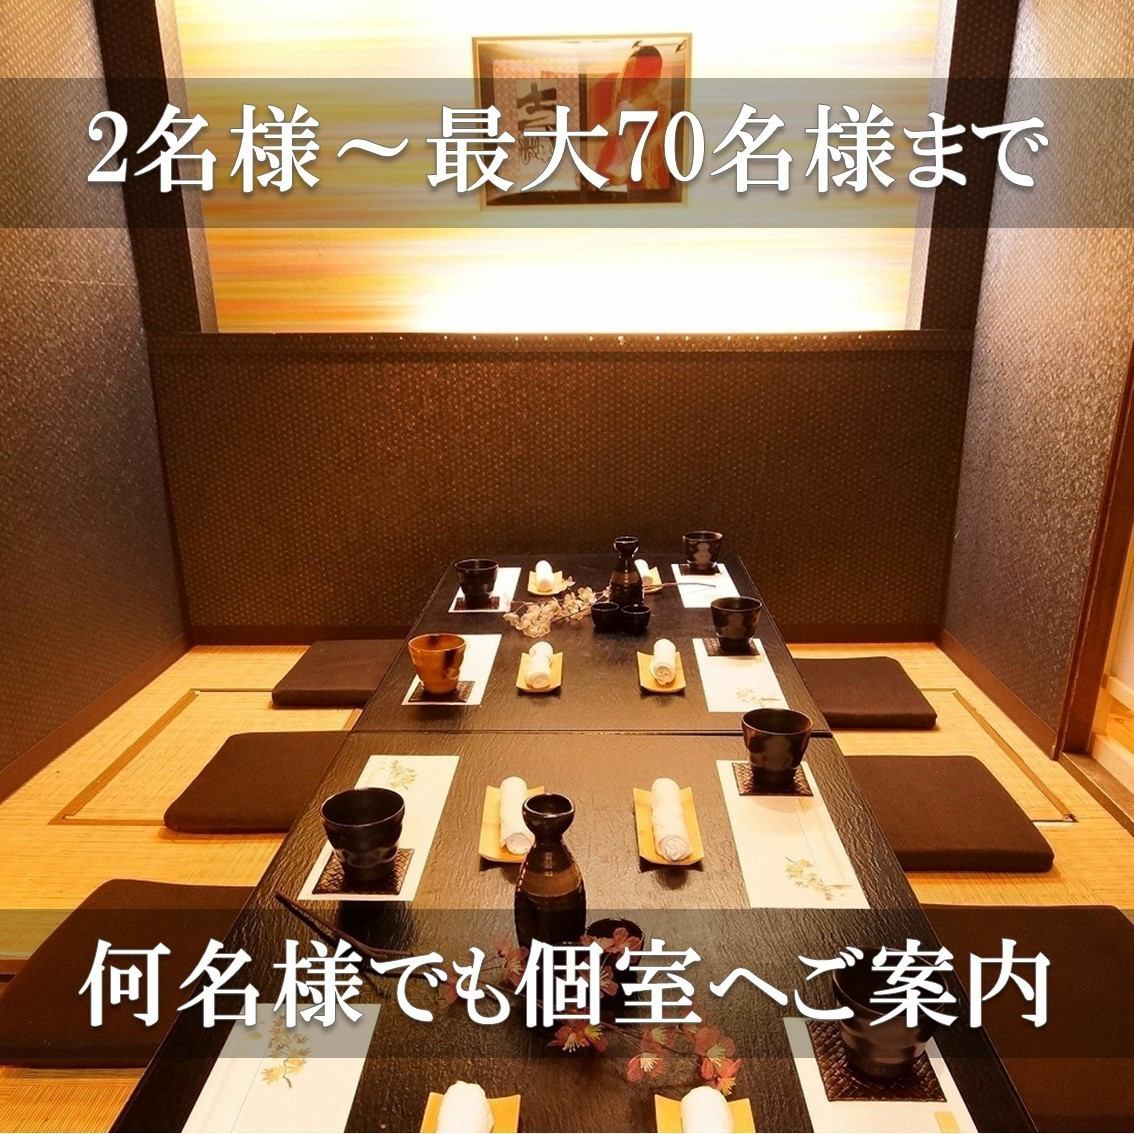 [For banquets!!] Unlimited seat time! Courses available from 3,500 yen